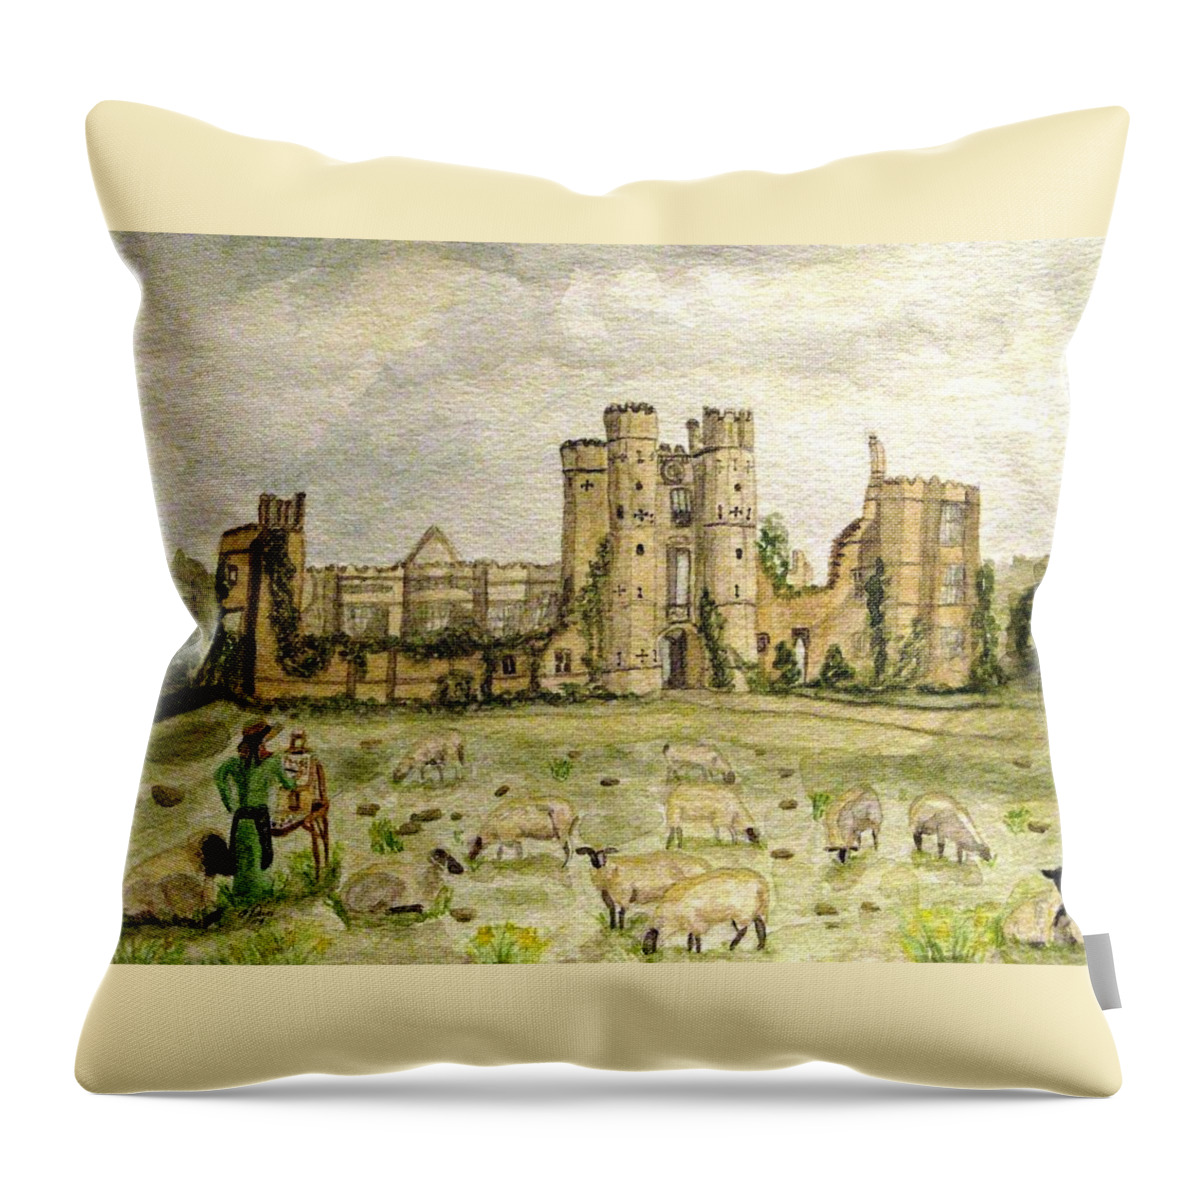 Sheep Throw Pillow featuring the painting Plein Air Painting At Cowdray House Sussex by Angela Davies